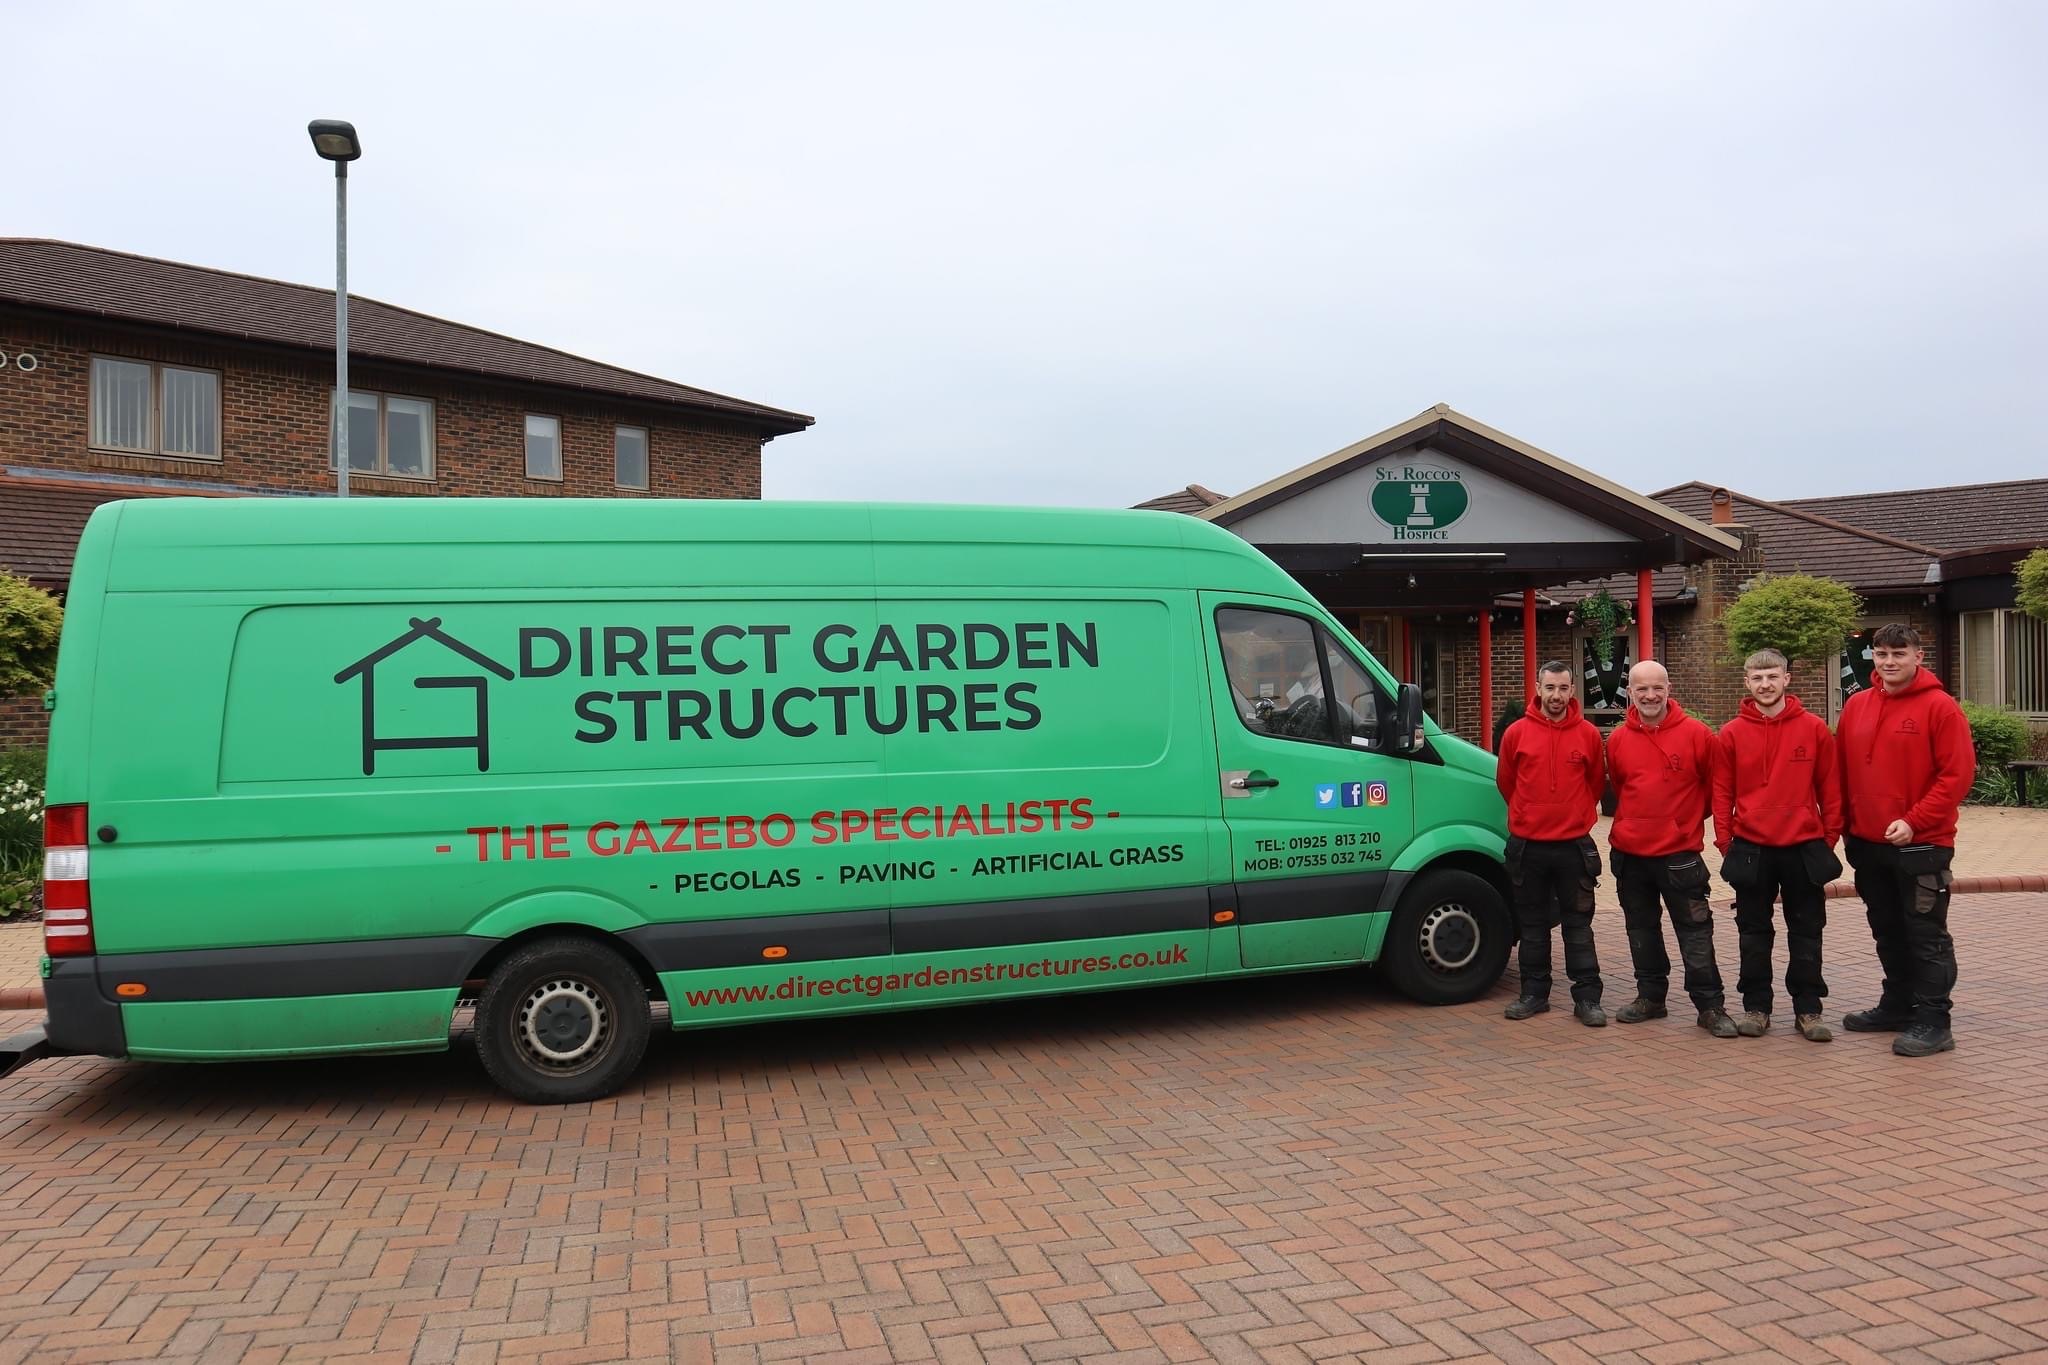 The team at Direct Garden Structures